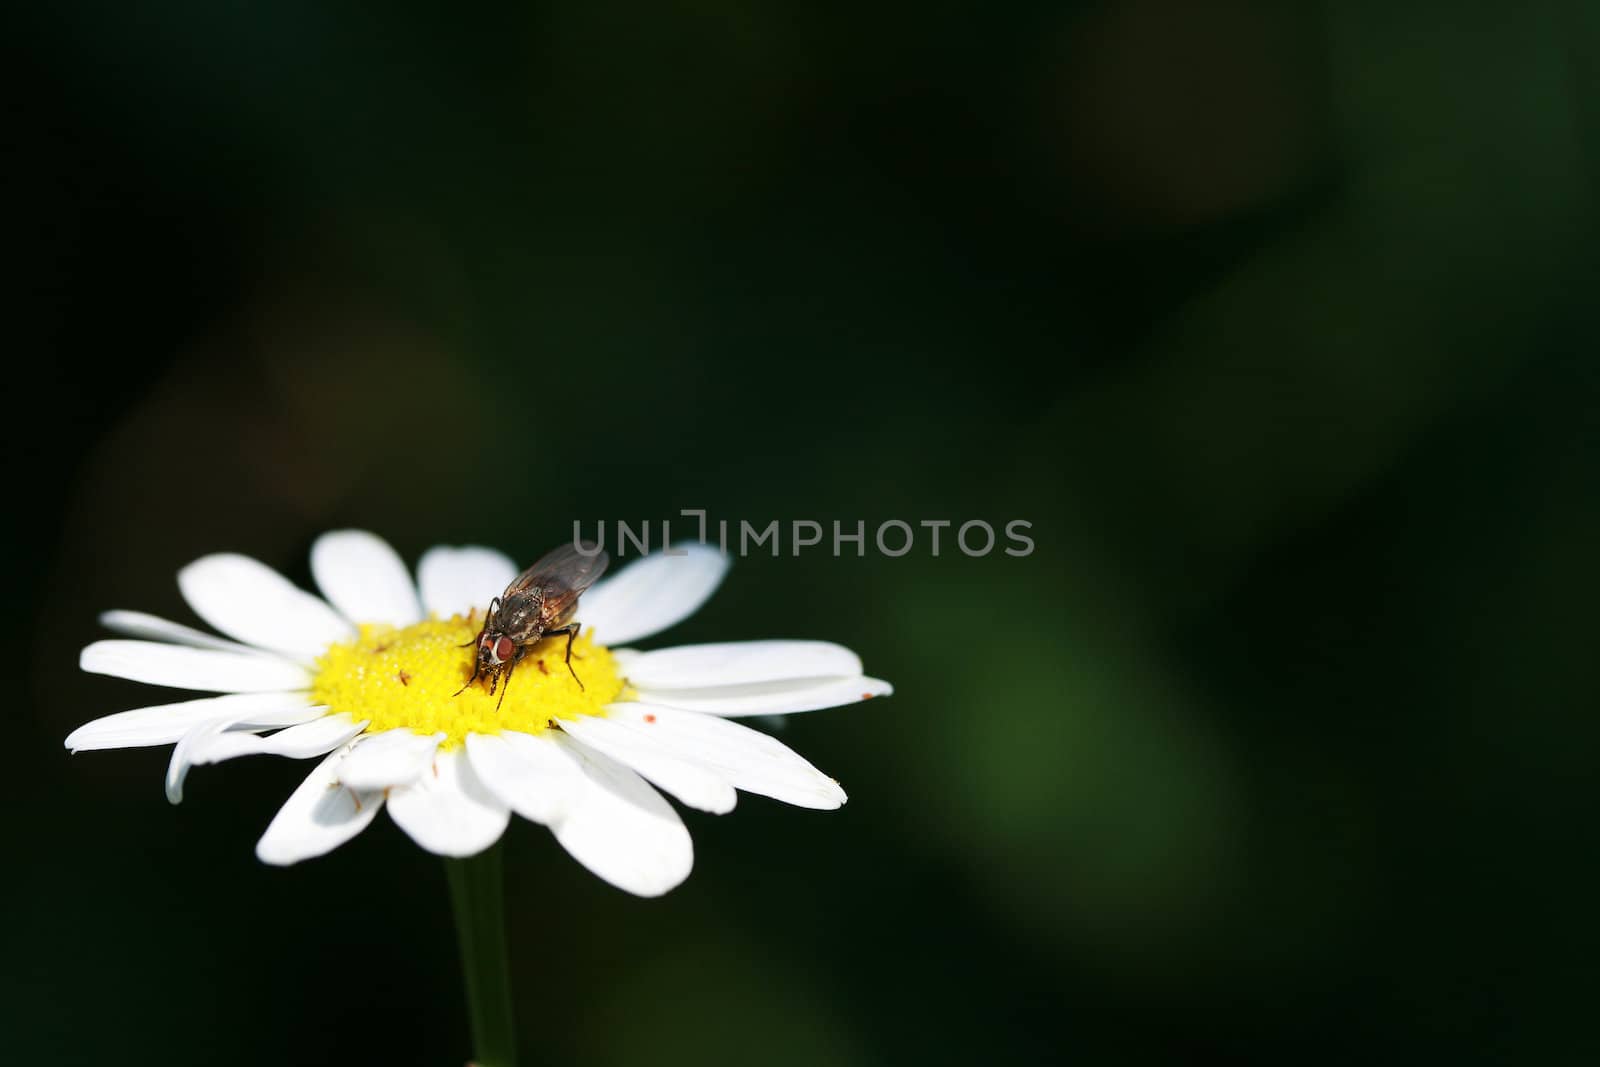 The fly sits on a camomile shined by light